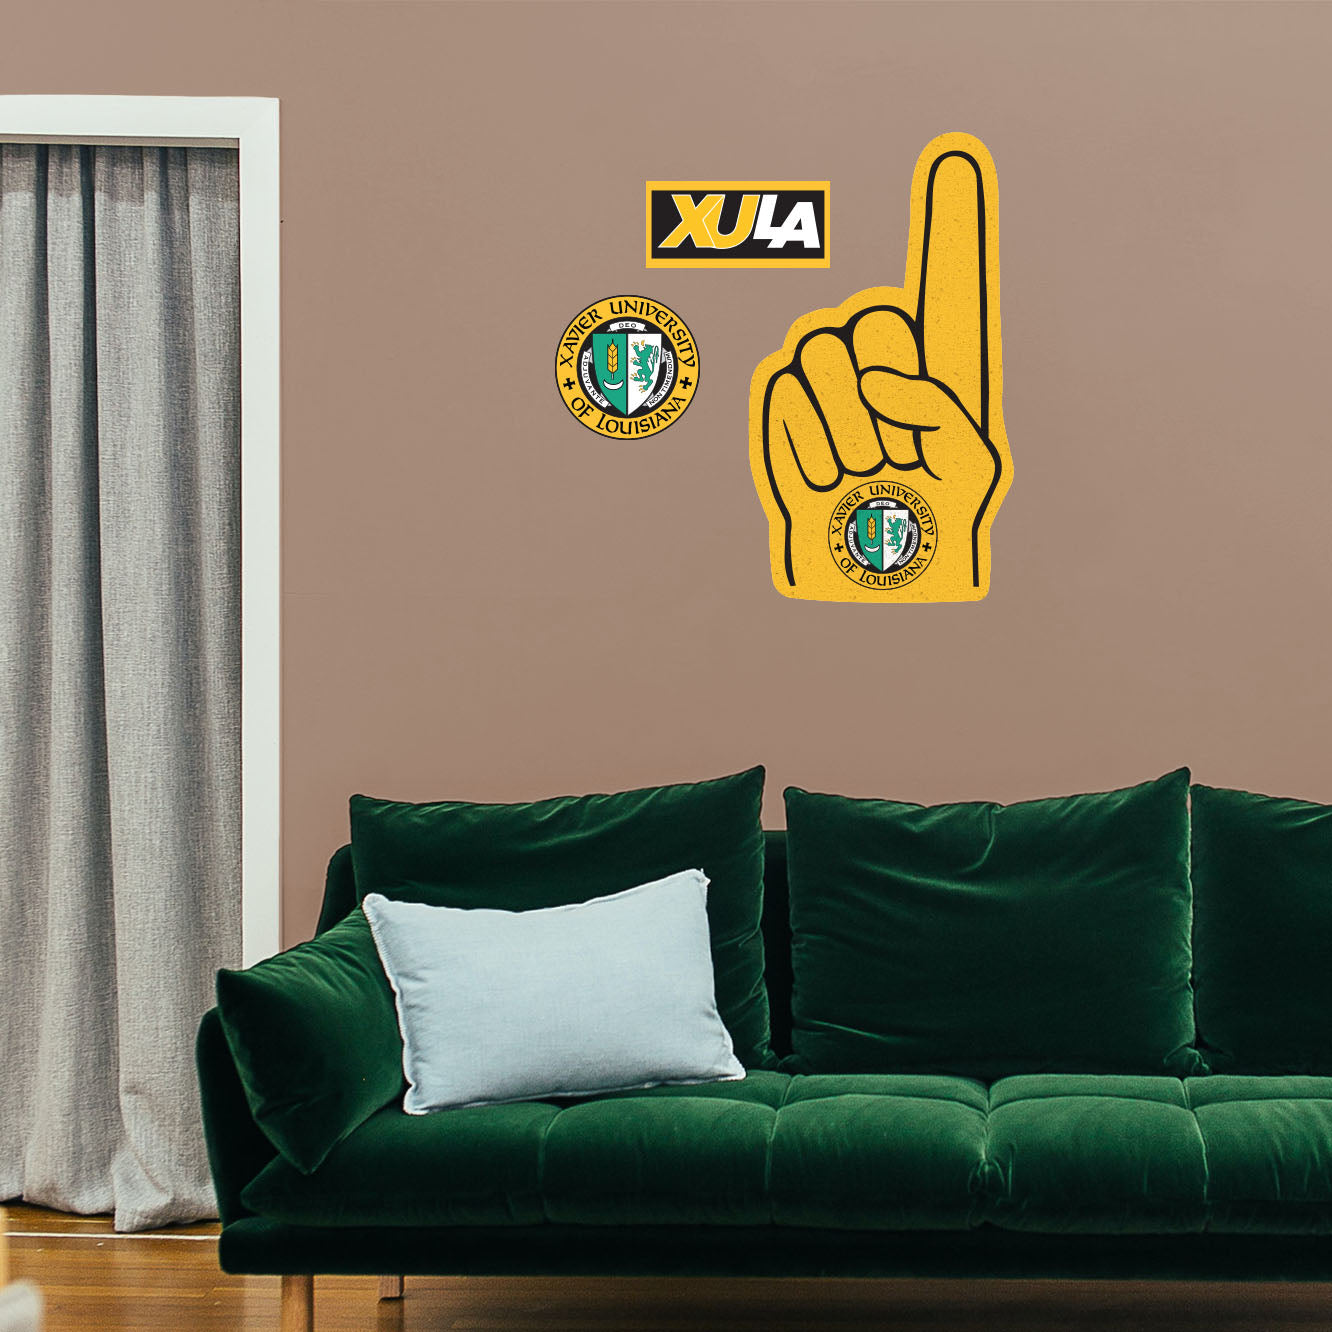 XULA Gold Rush: Foam Finger - Officially Licensed NCAA Removable Adhesive Decal